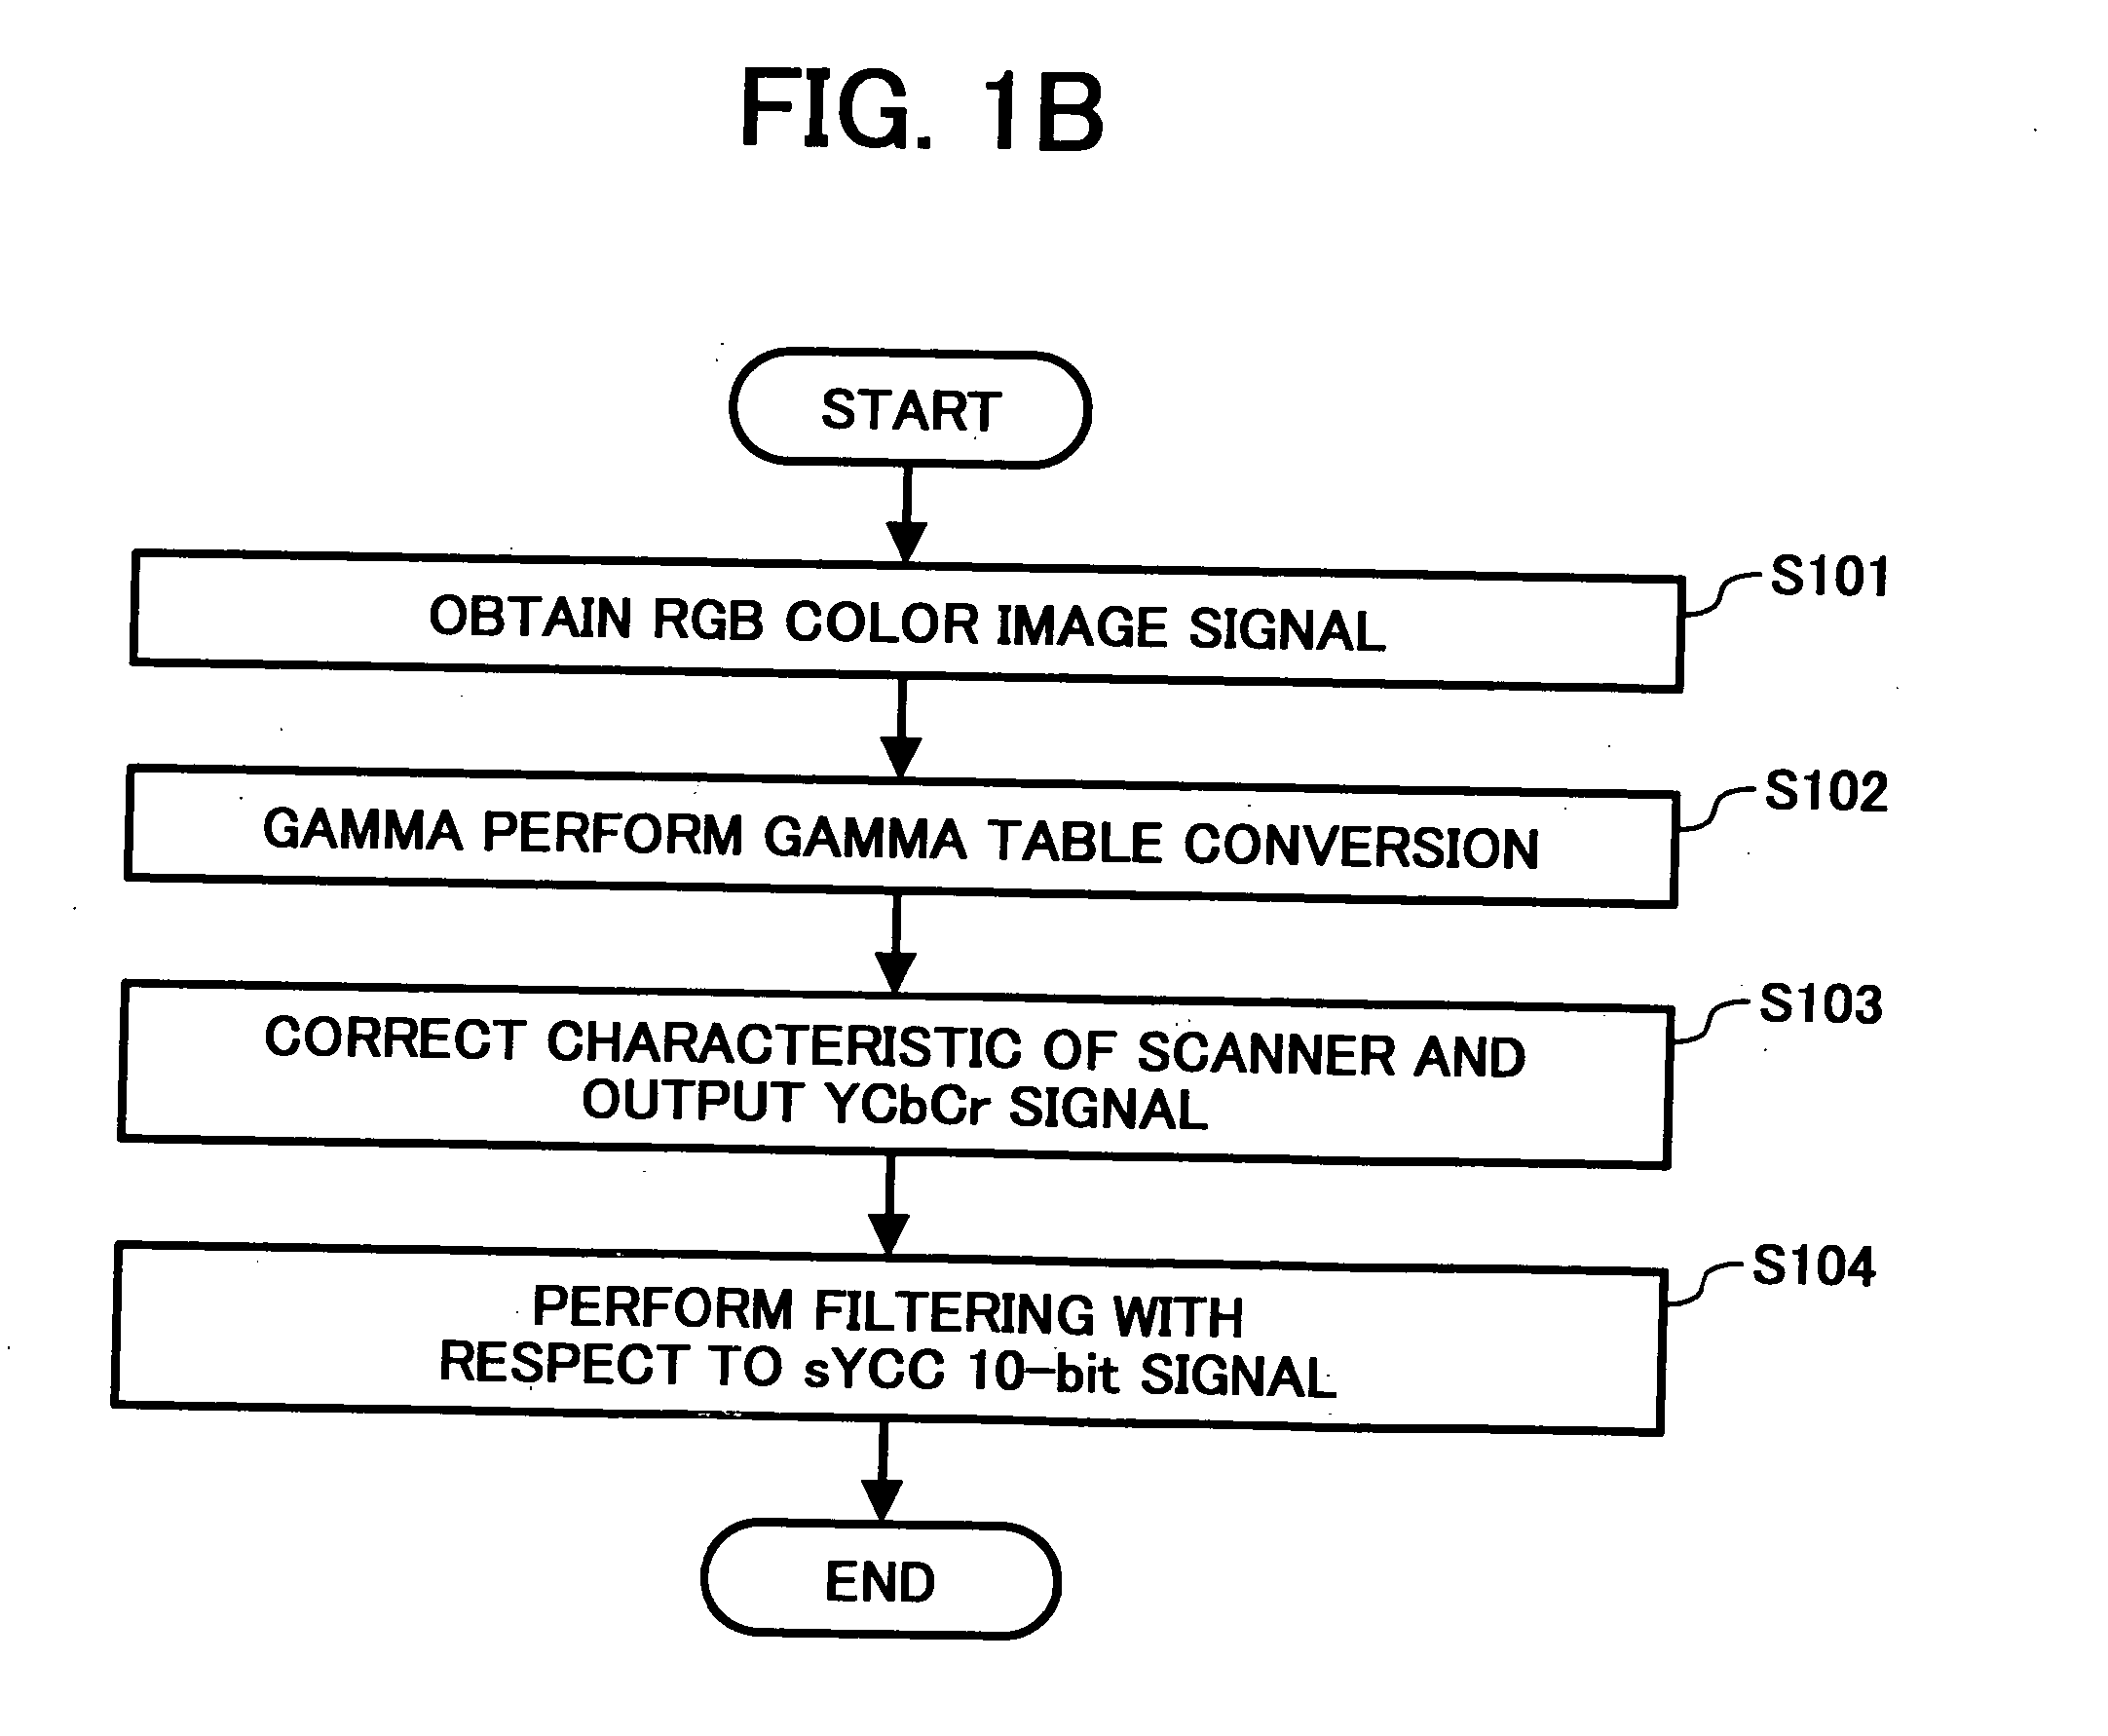 Apparatus and method for image processing, and computer product